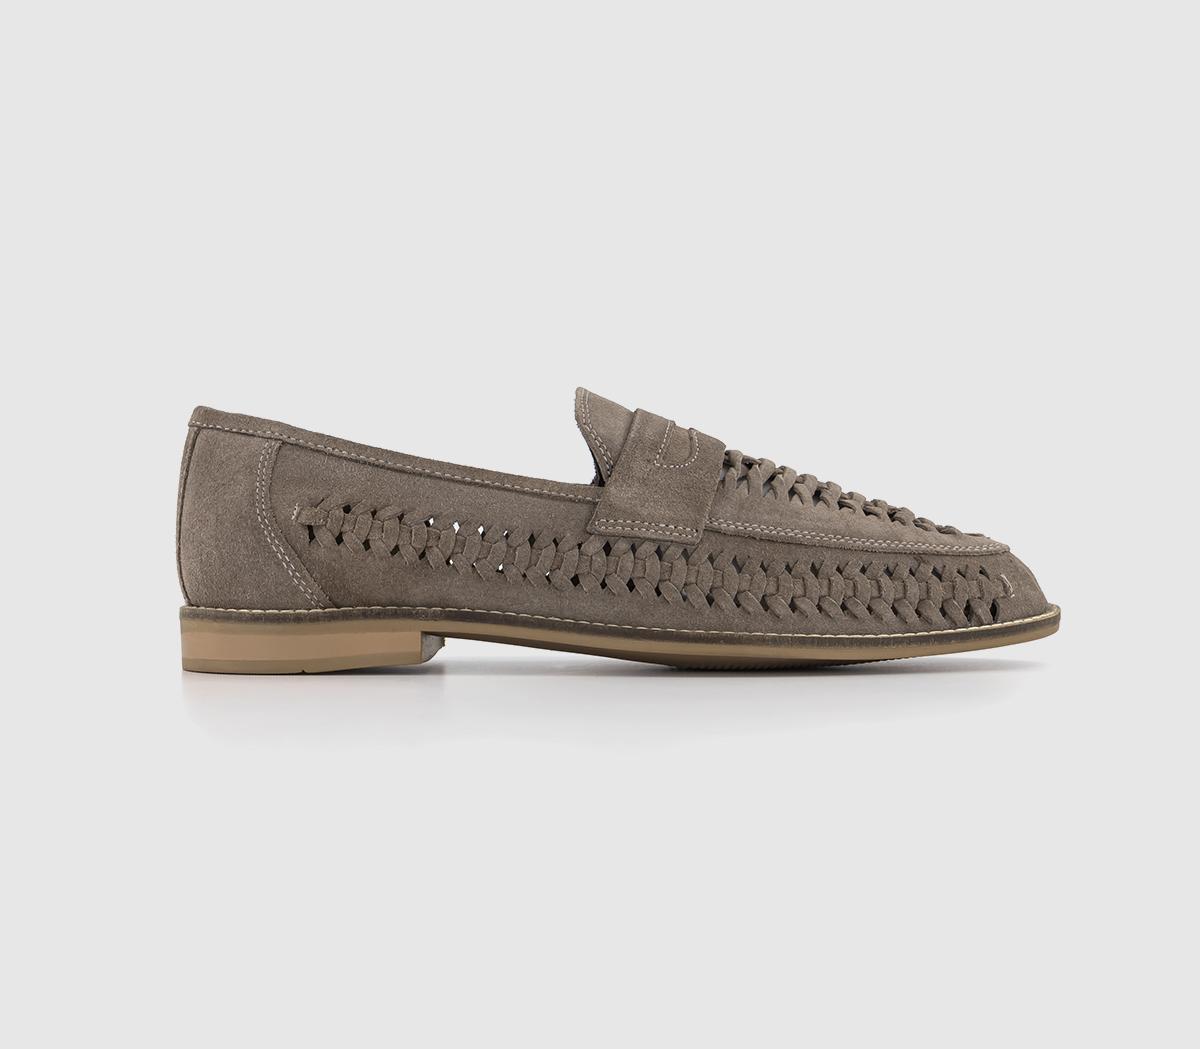 OFFICEChiswick 2 Woven Saddle ShoesStone Suede